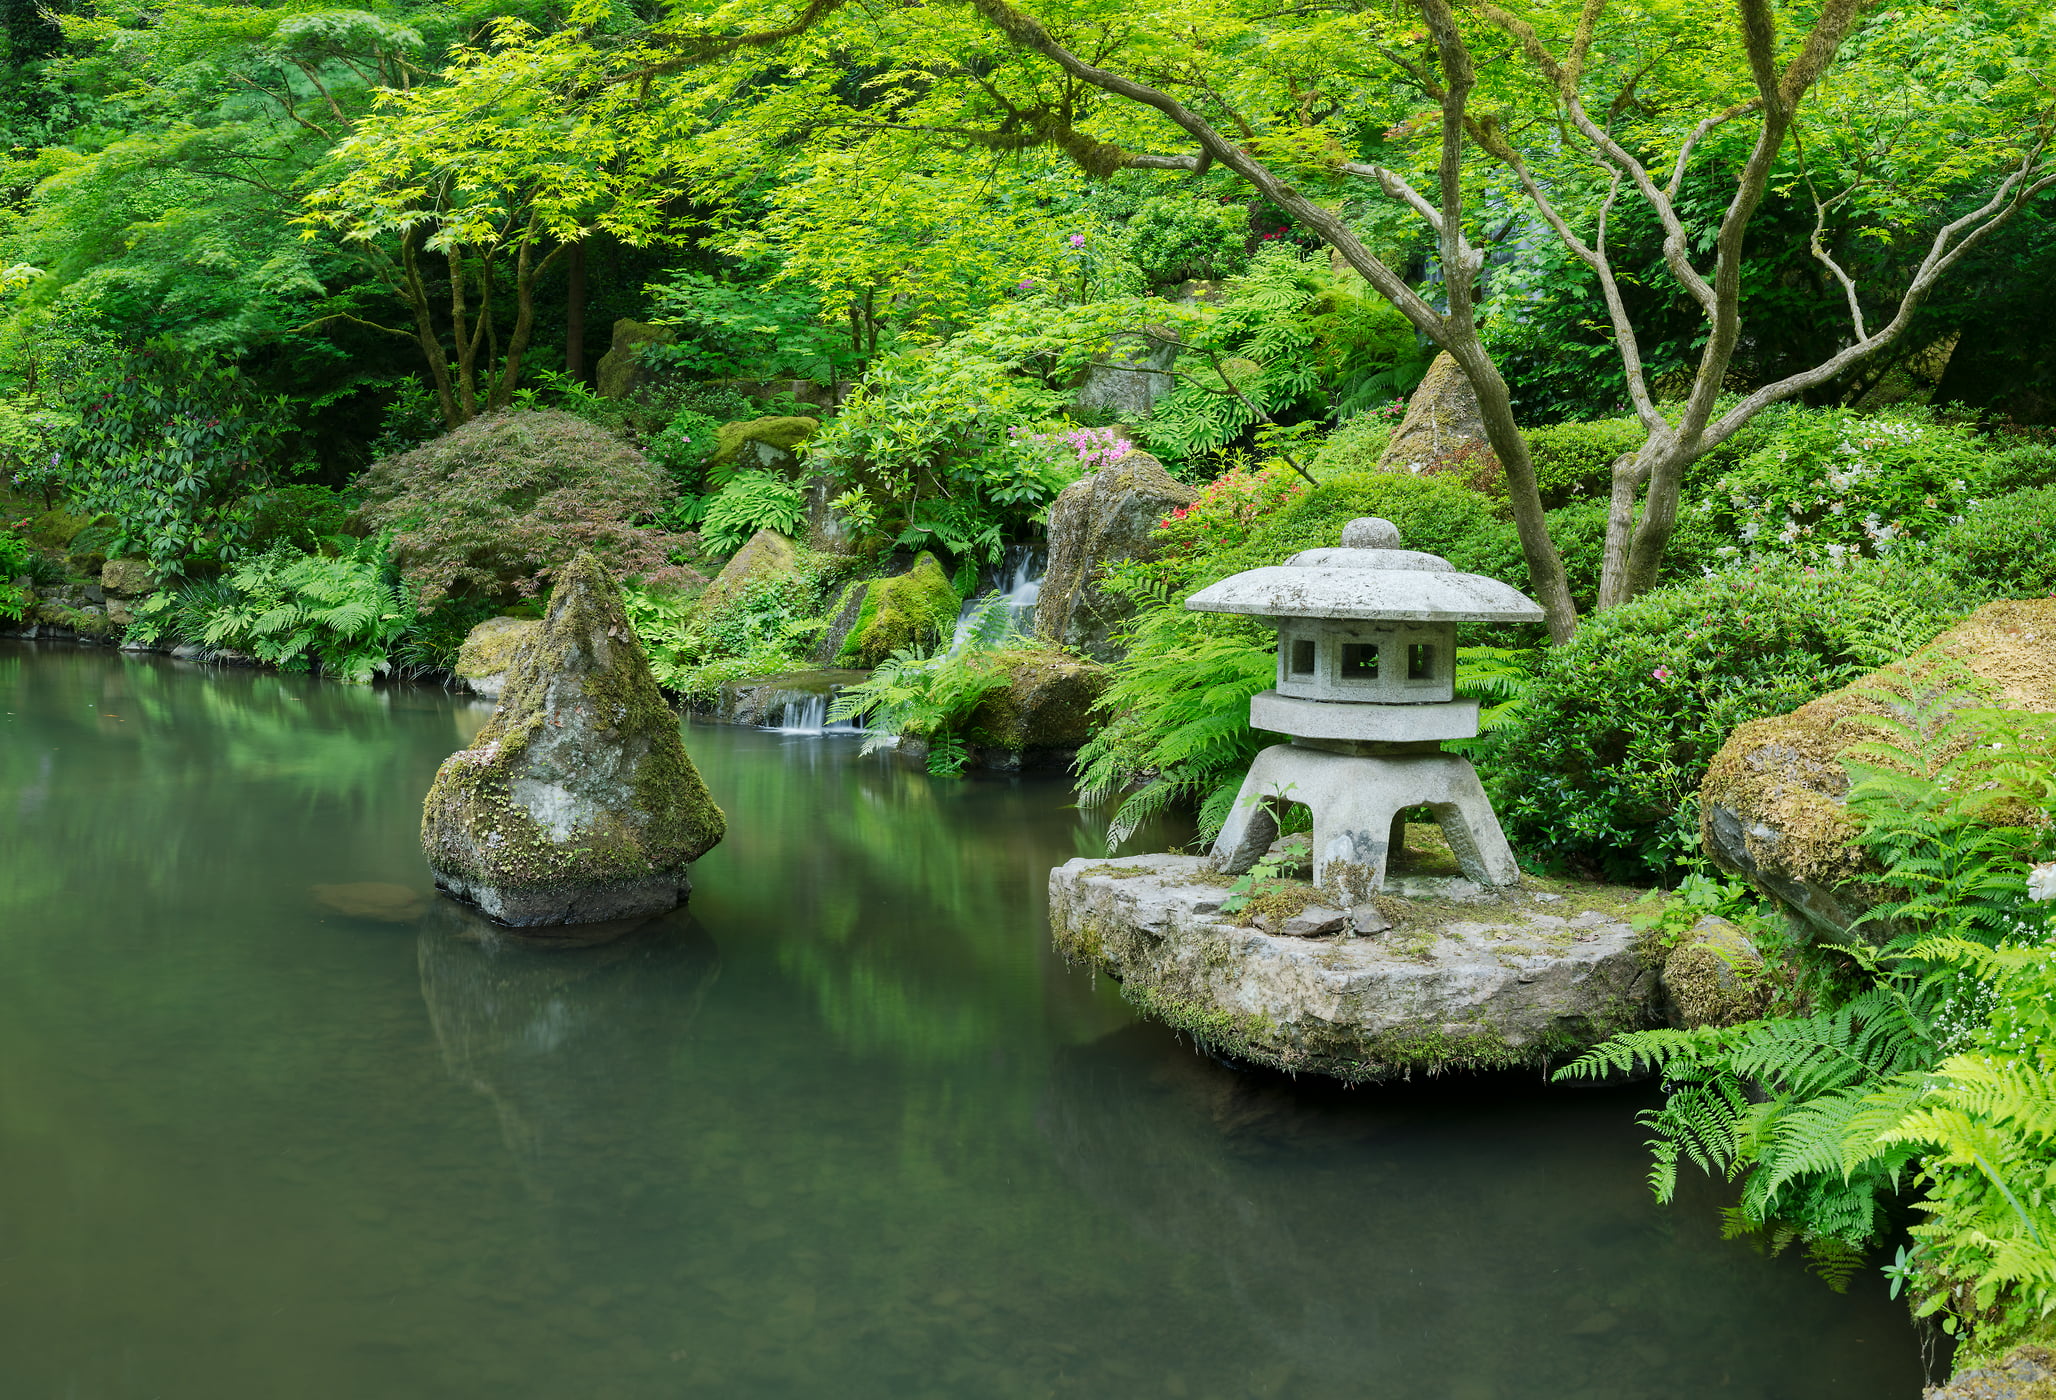 400 megapixels! A very high resolution, large-format VAST photo print of a Japanese garden with a pond and t?r? stone lantern; photograph created by Greg Probst in Japanese Garden in Portland, Oregon